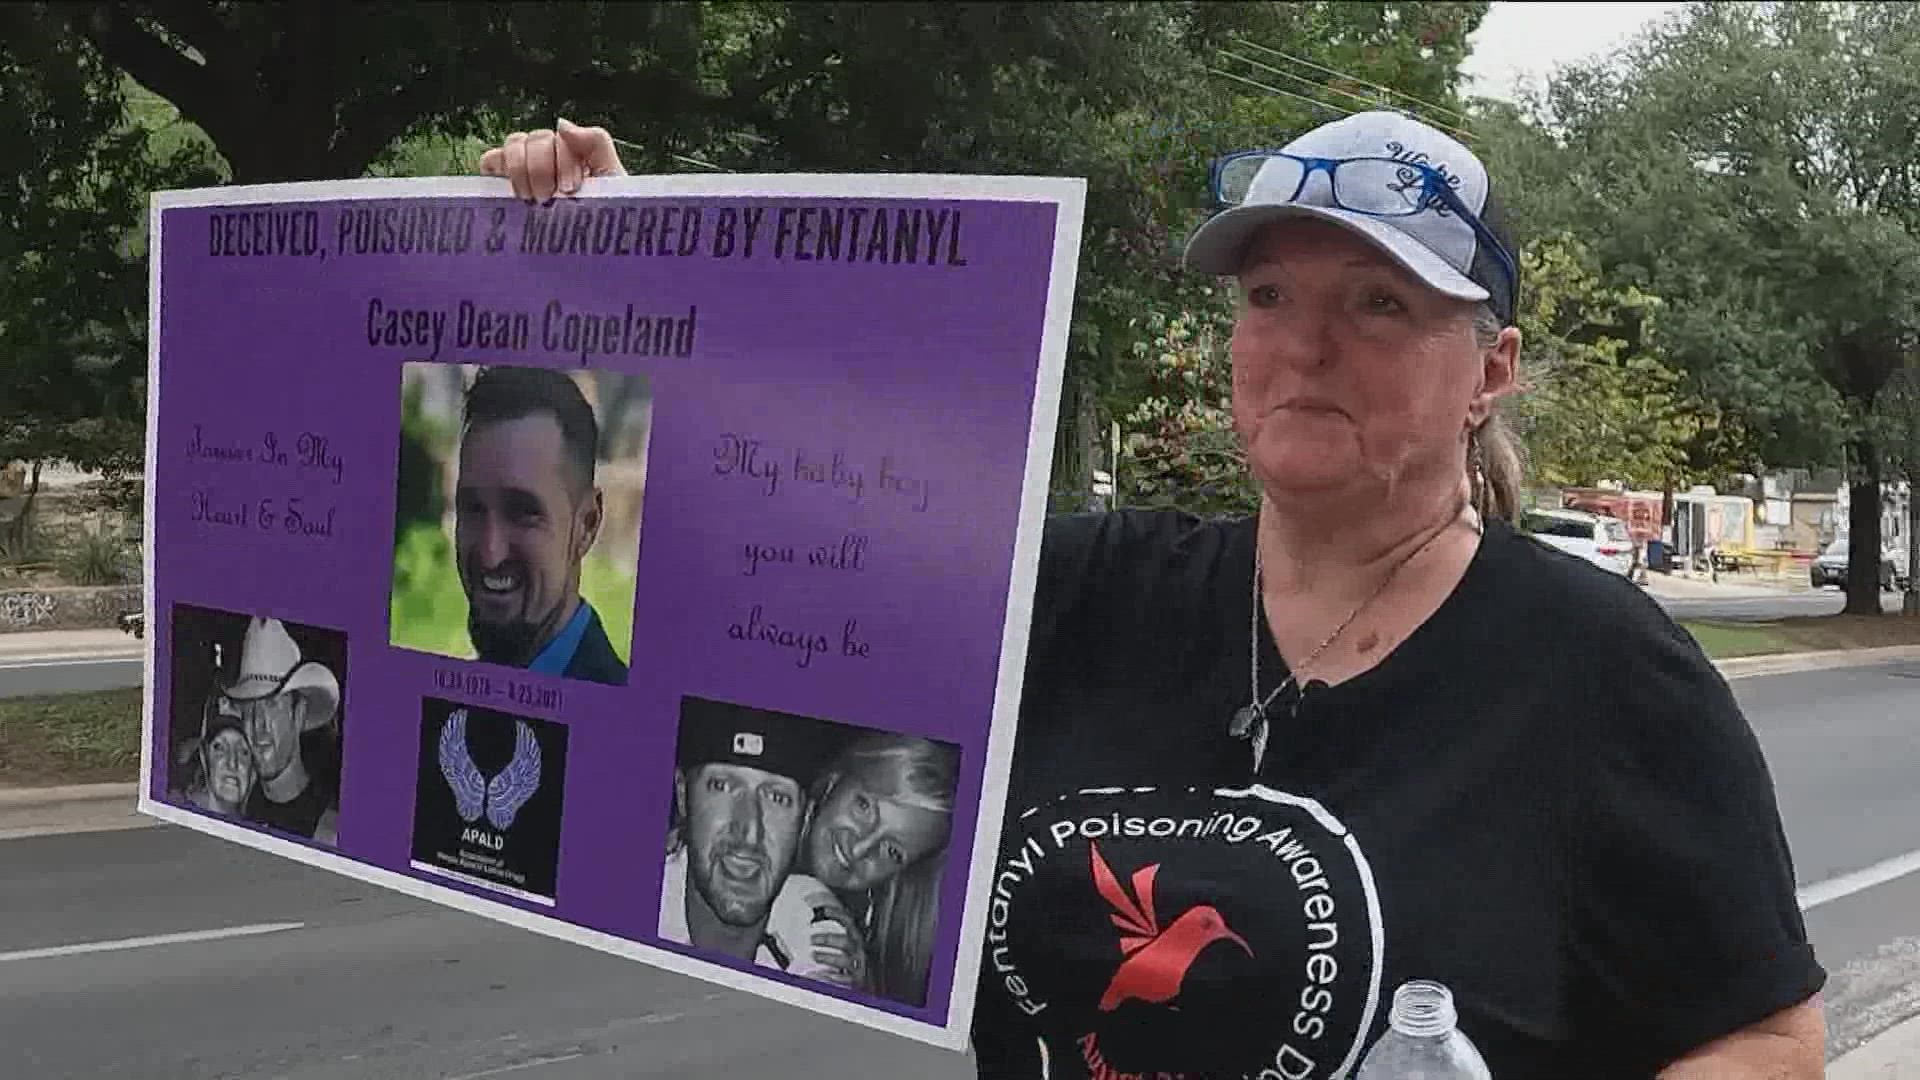 Dozens gathered in Austin and marched a mile to remember their family members and friends who died as a result of fentanyl.